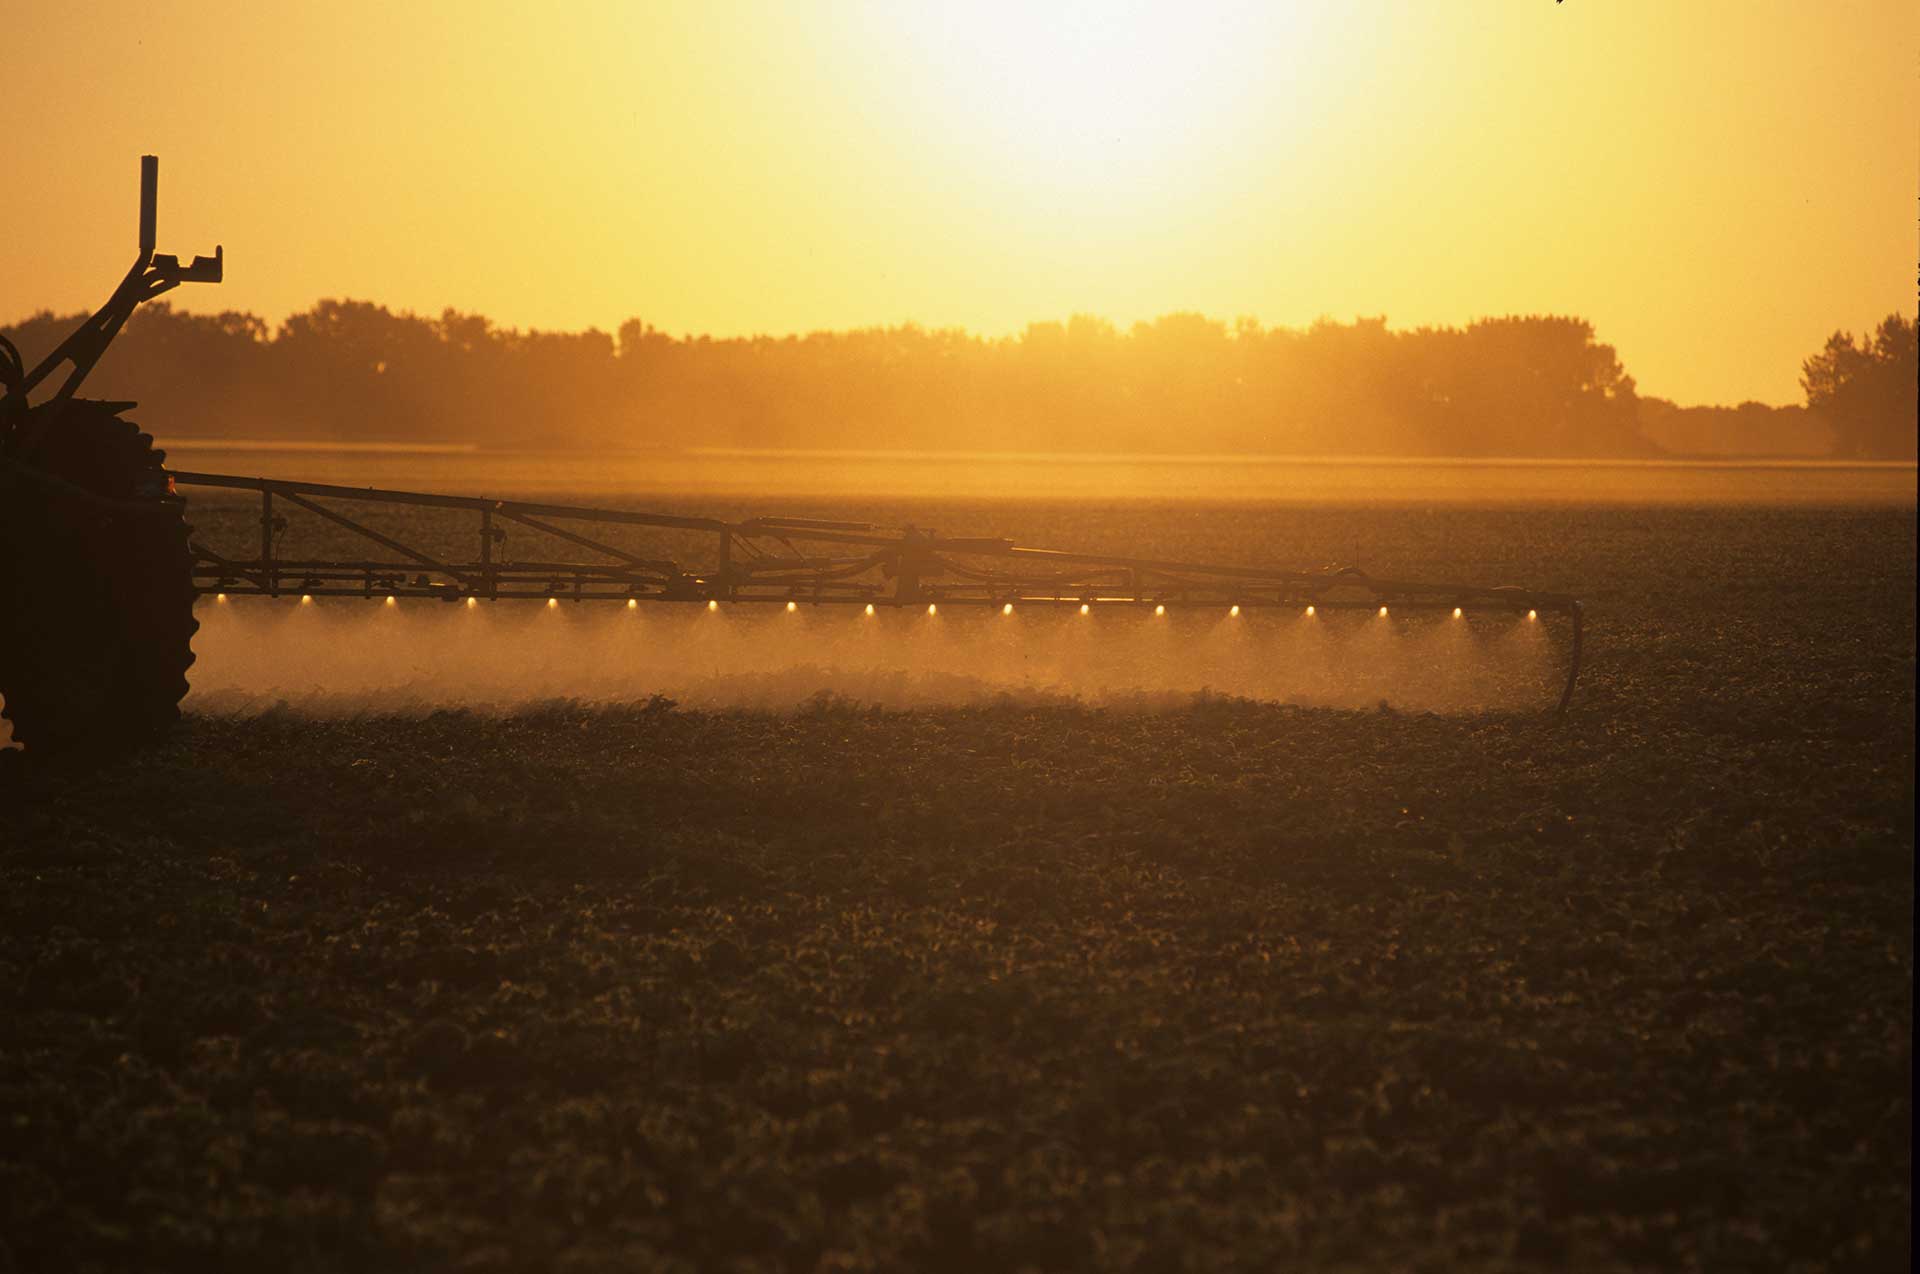 This agronomic image shows a soybean sprayer